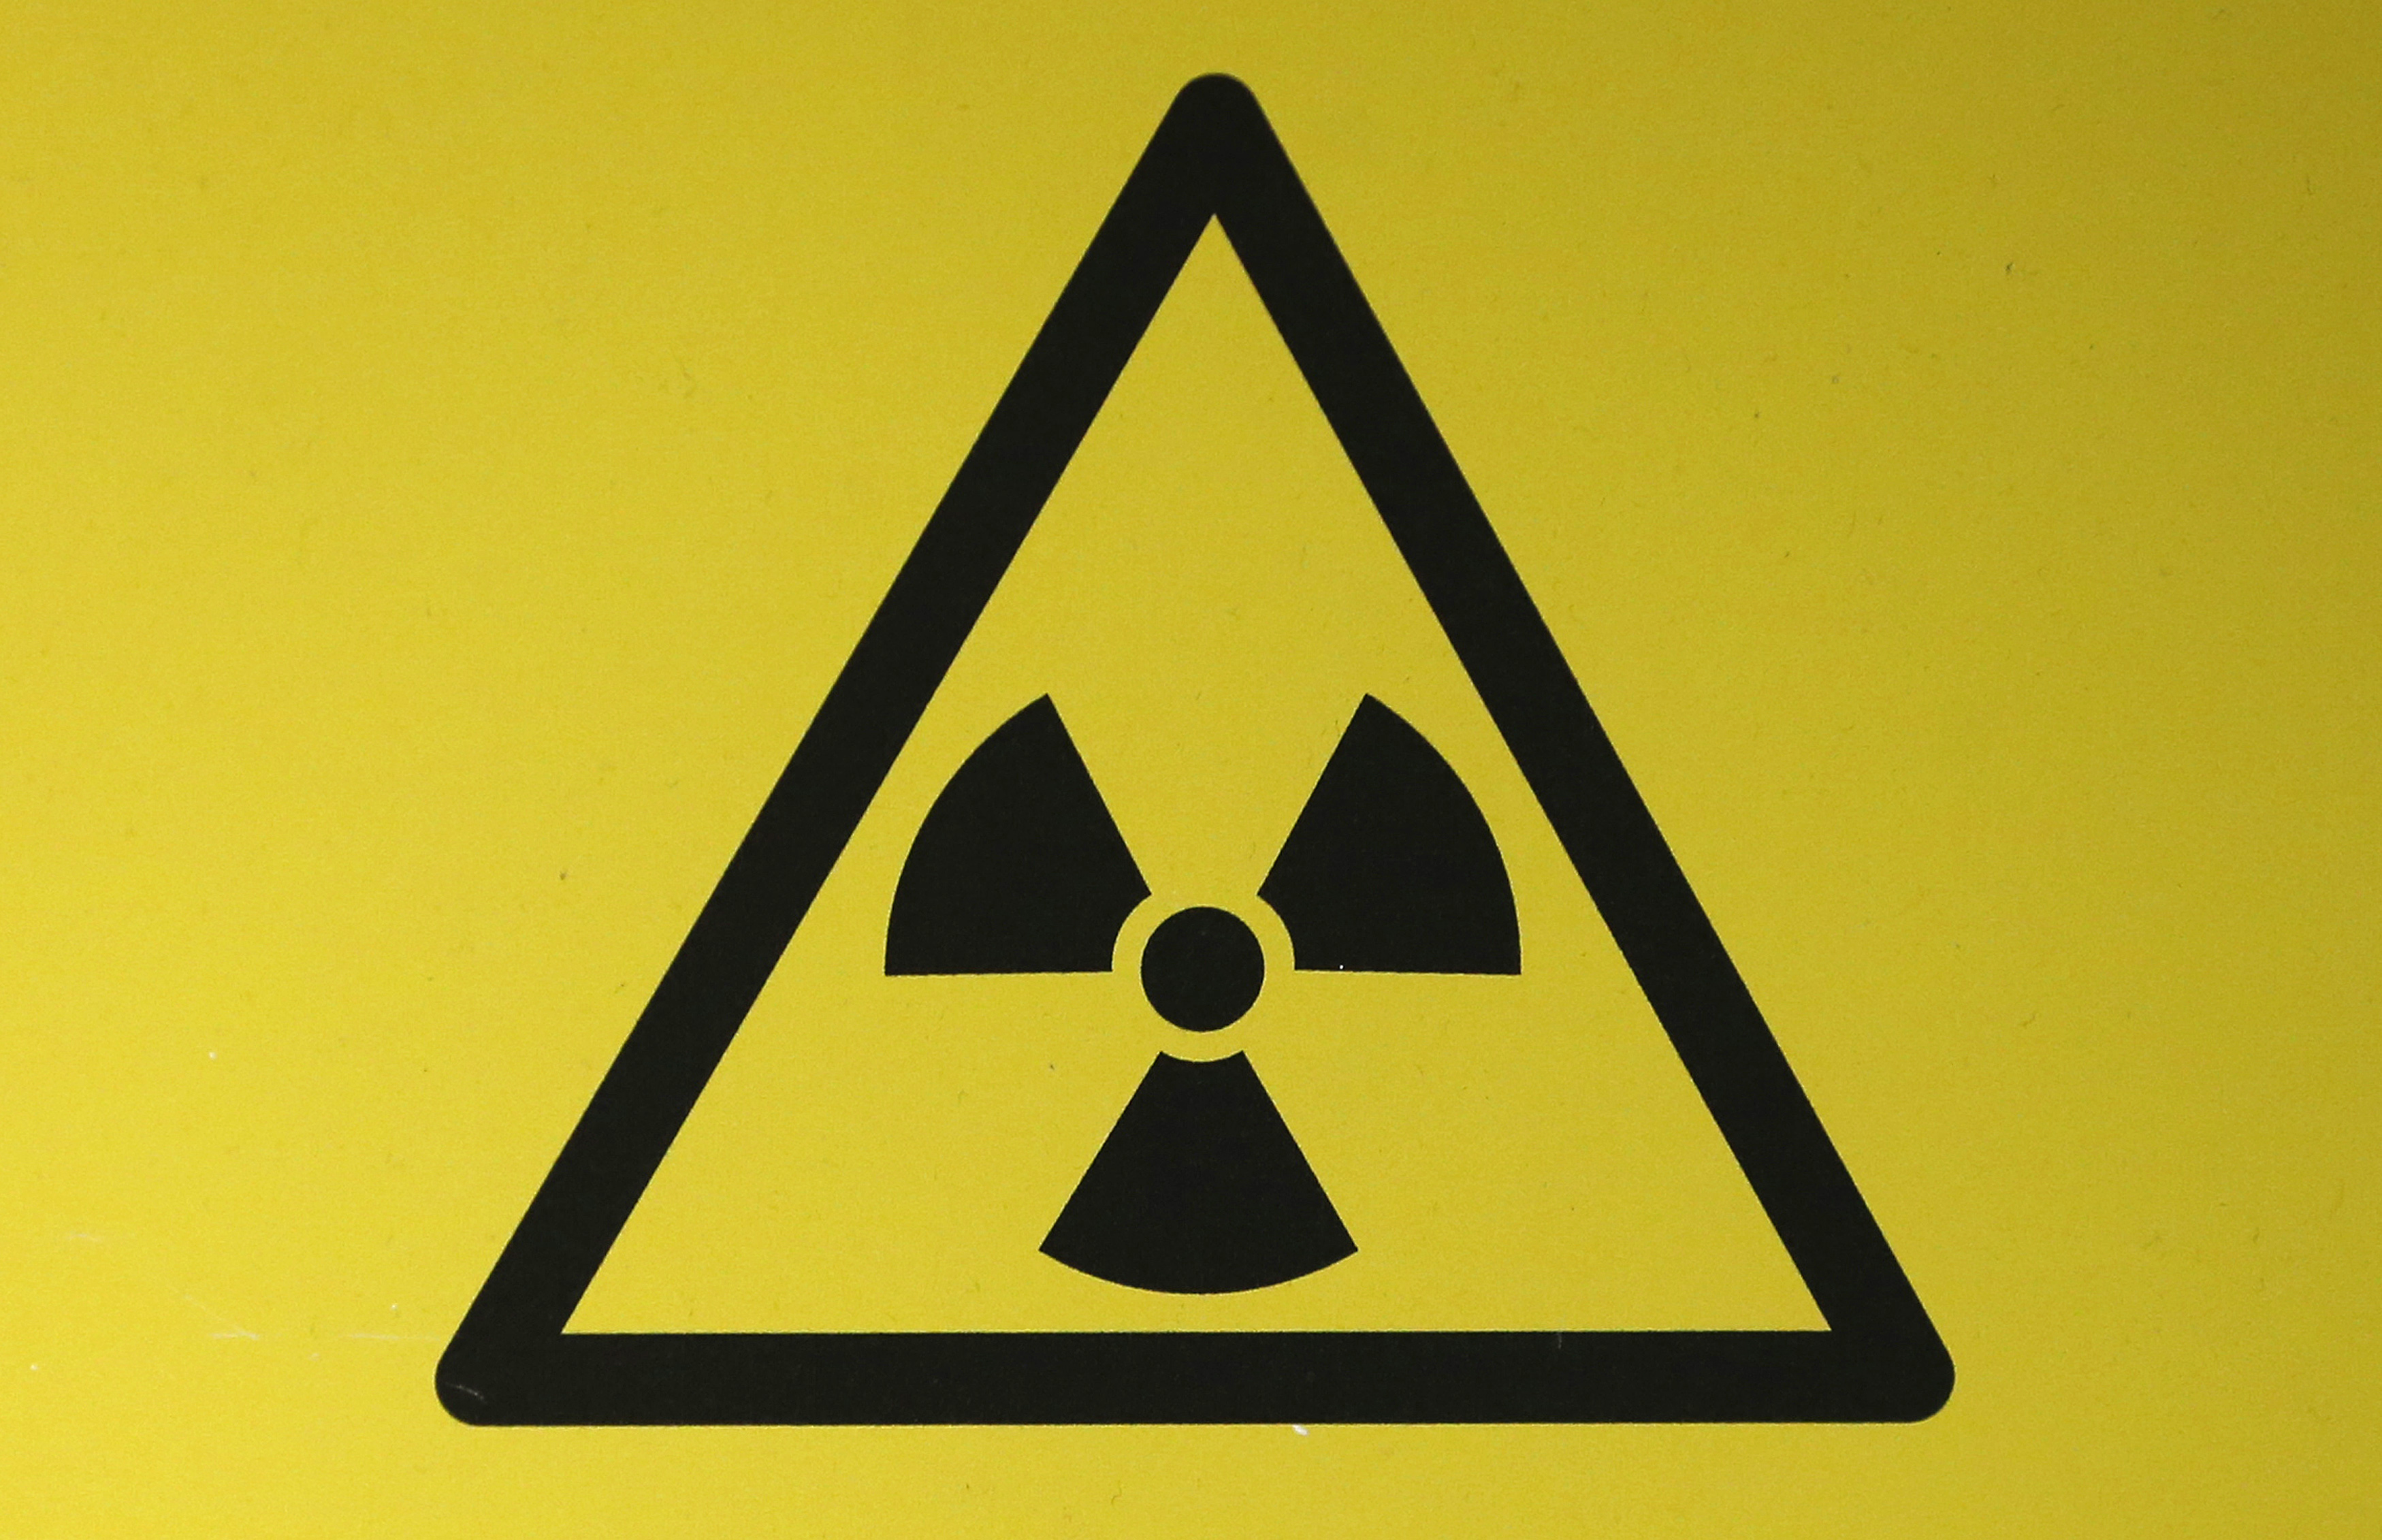 A RADIOACTIVE MATERIAL HAZARD SYMBOL, CALLED A TREFOIL, IS SEEN ...